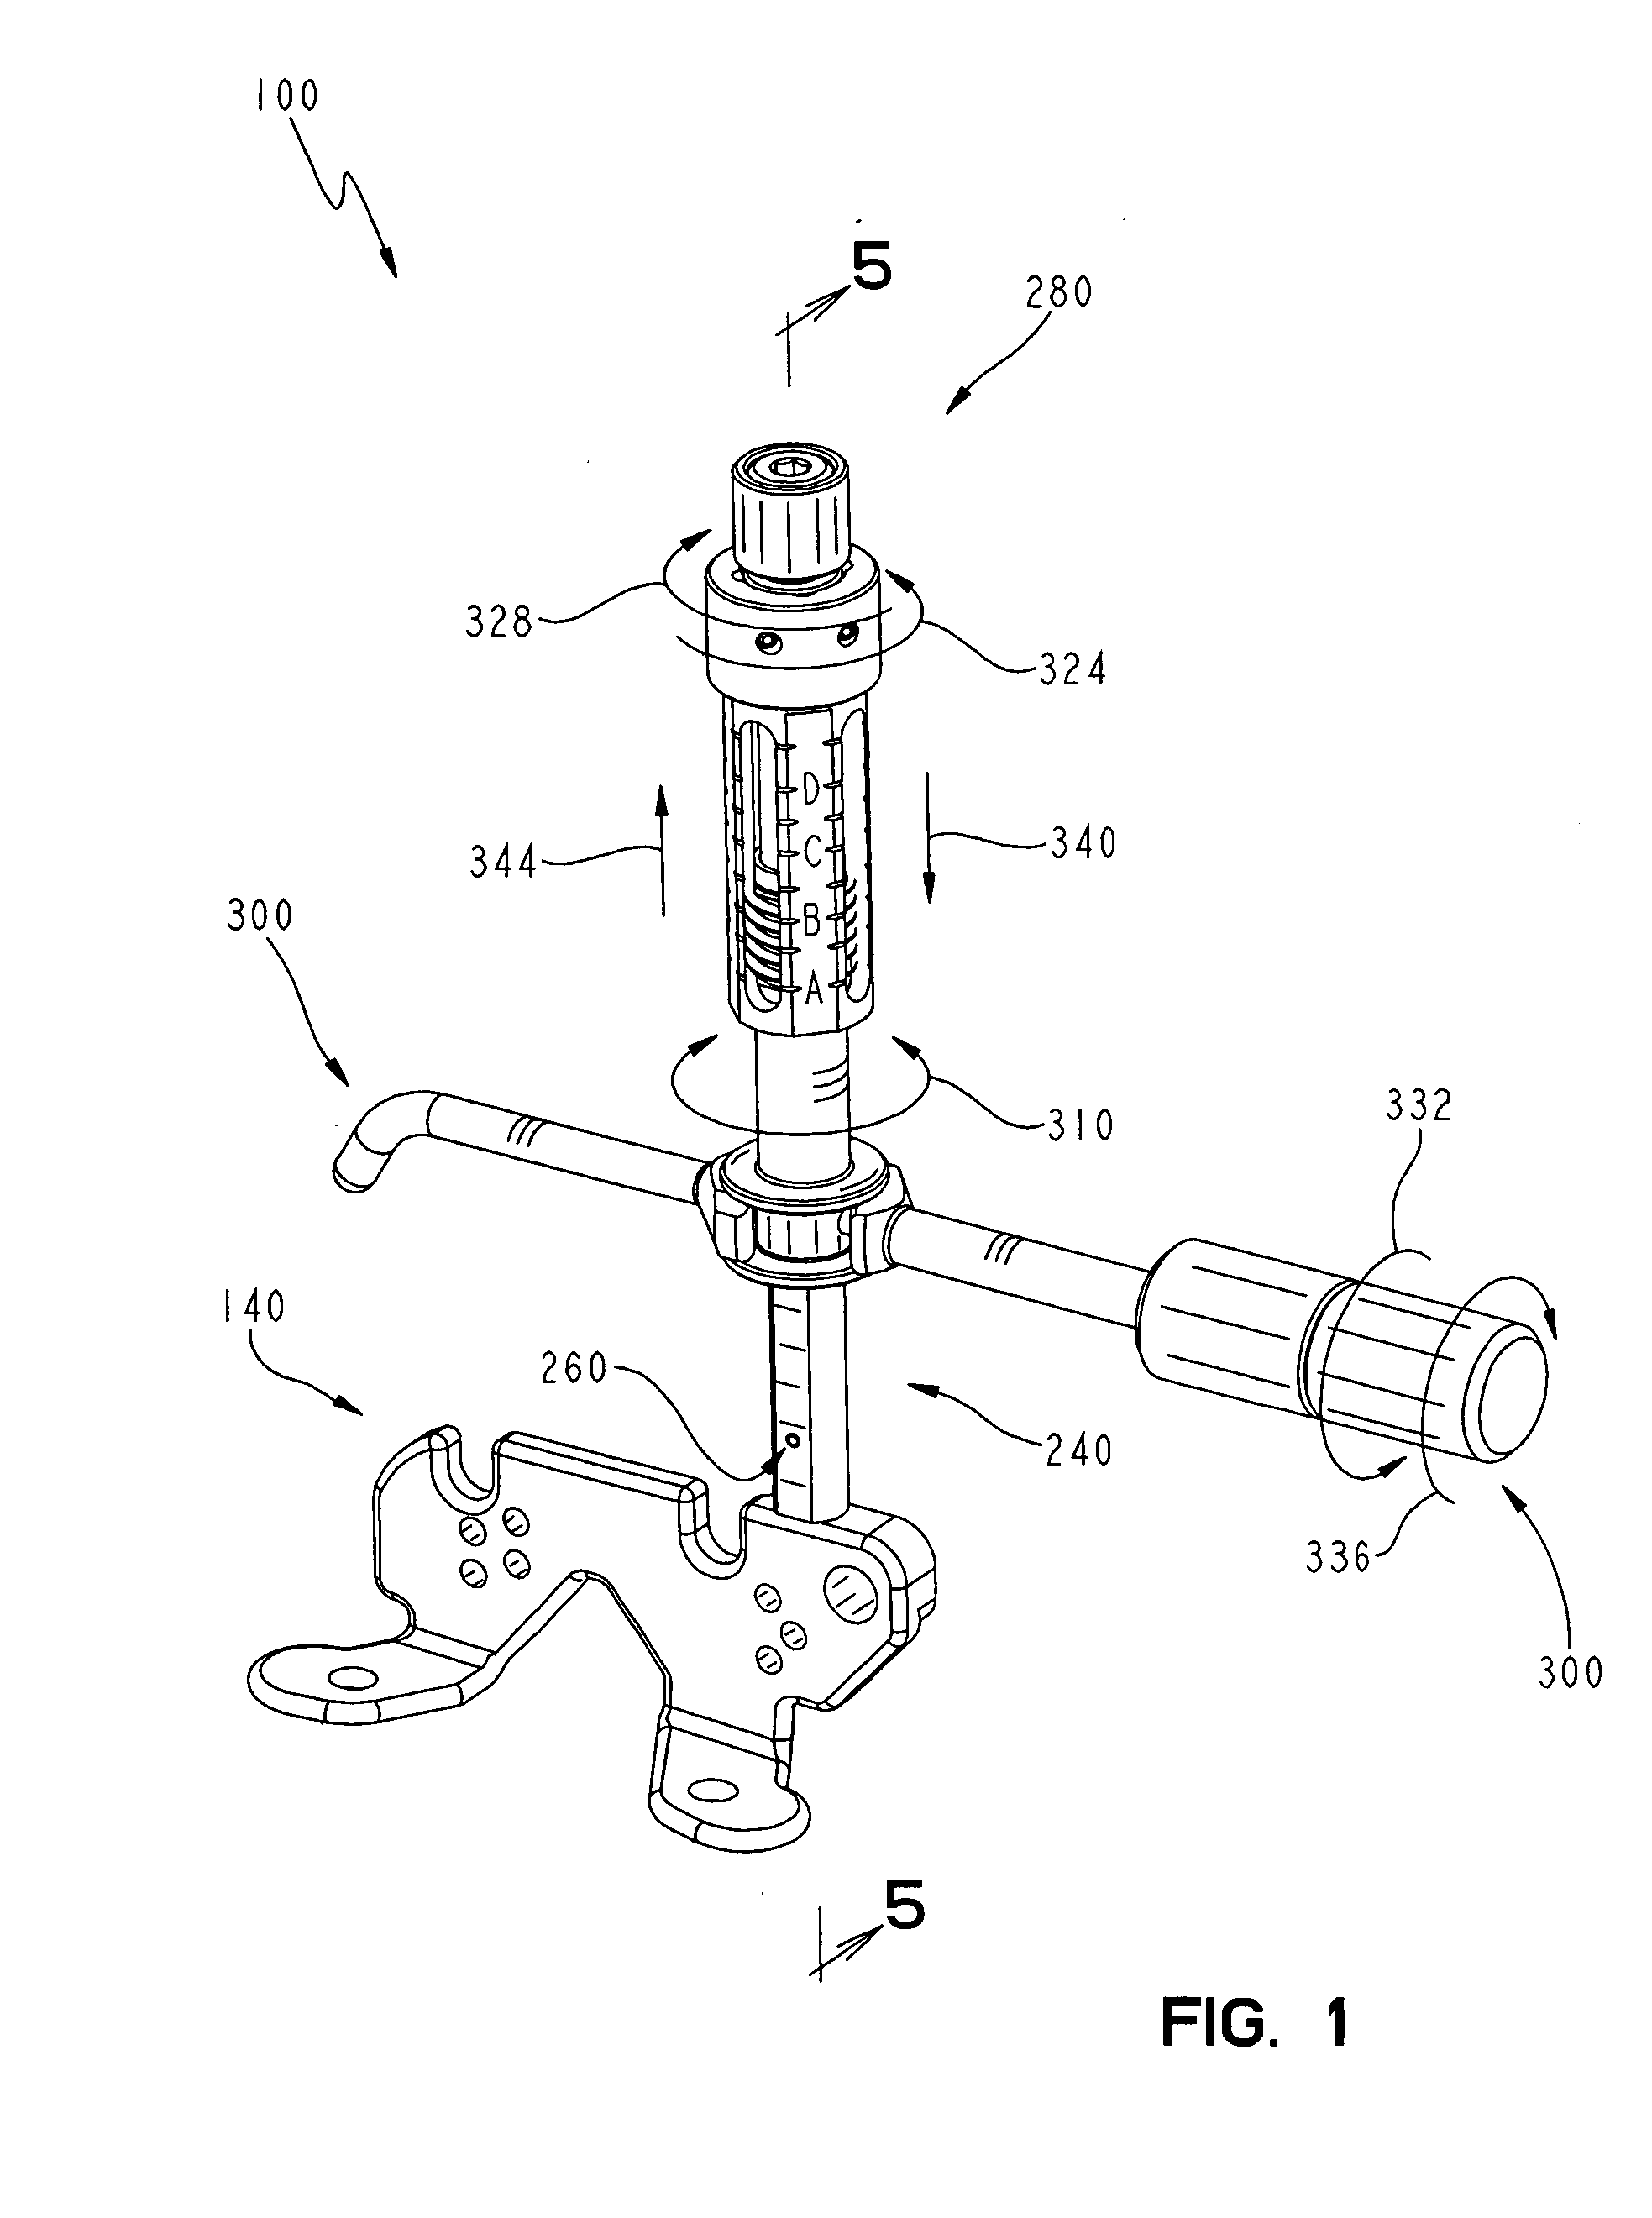 Apparatus and method for sizing a distal femur